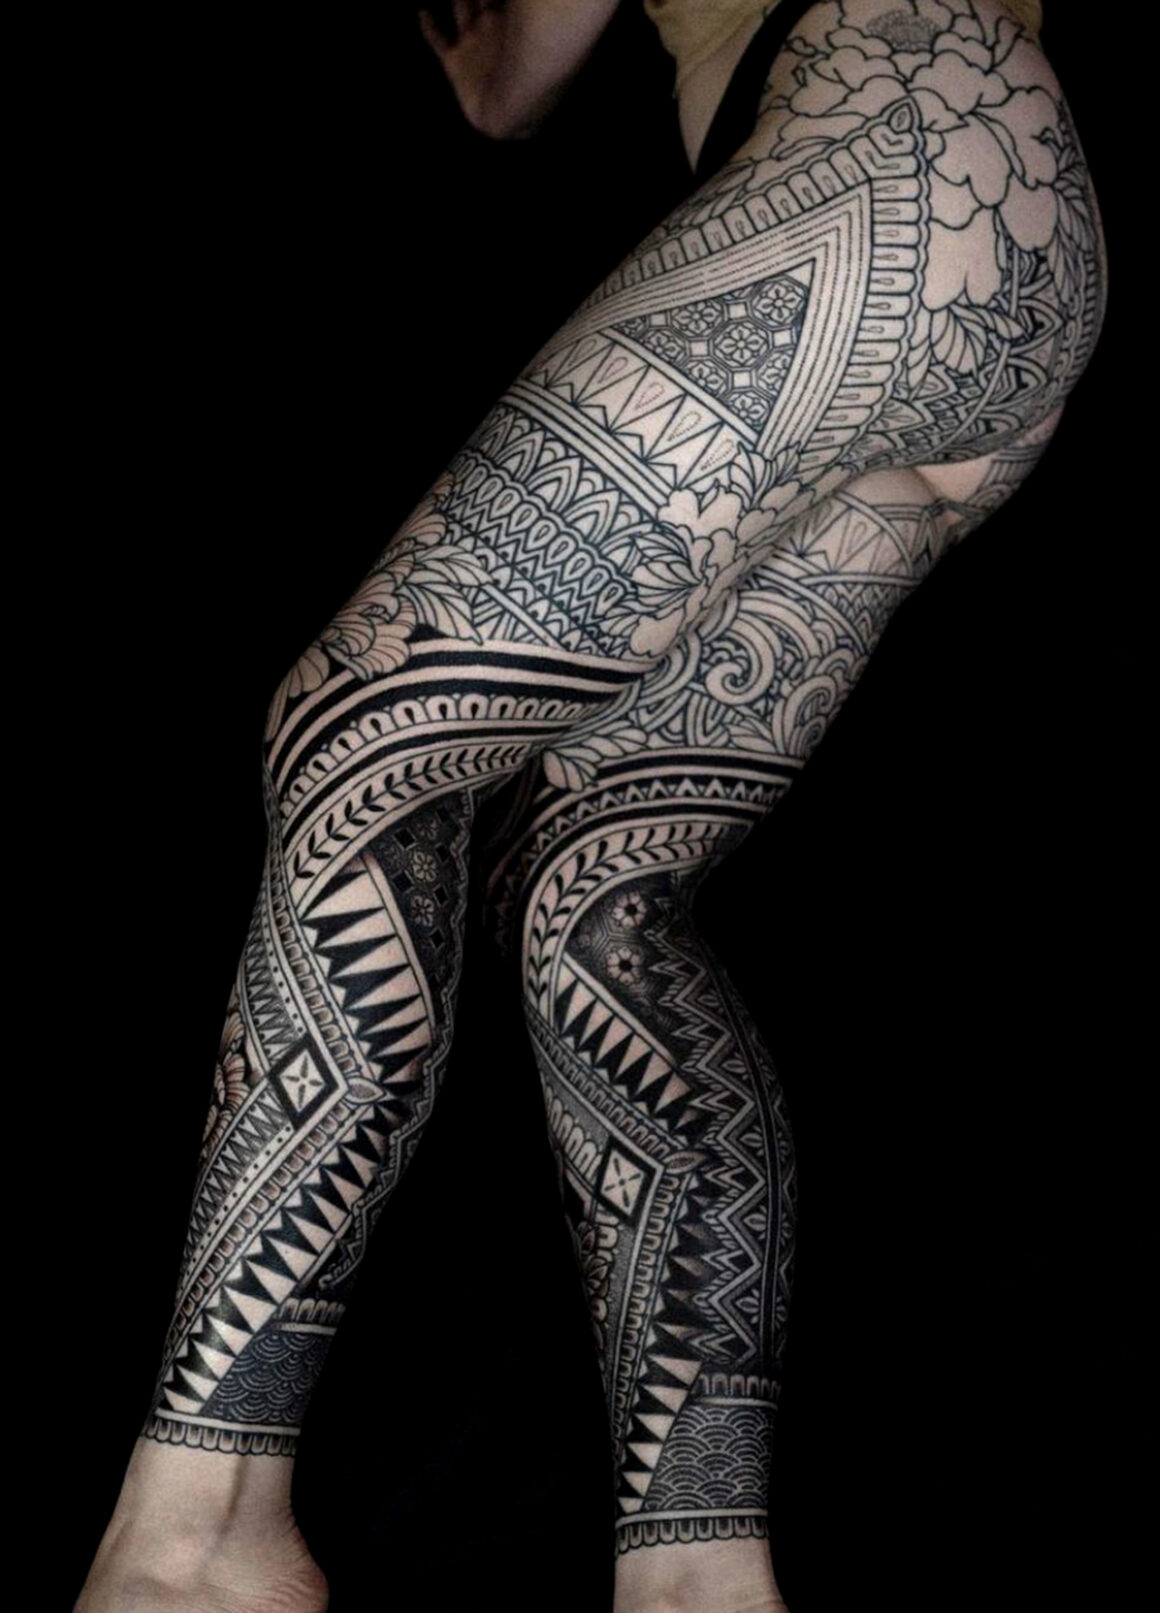 Tattoo by Dino Vallely, @dino_vallely